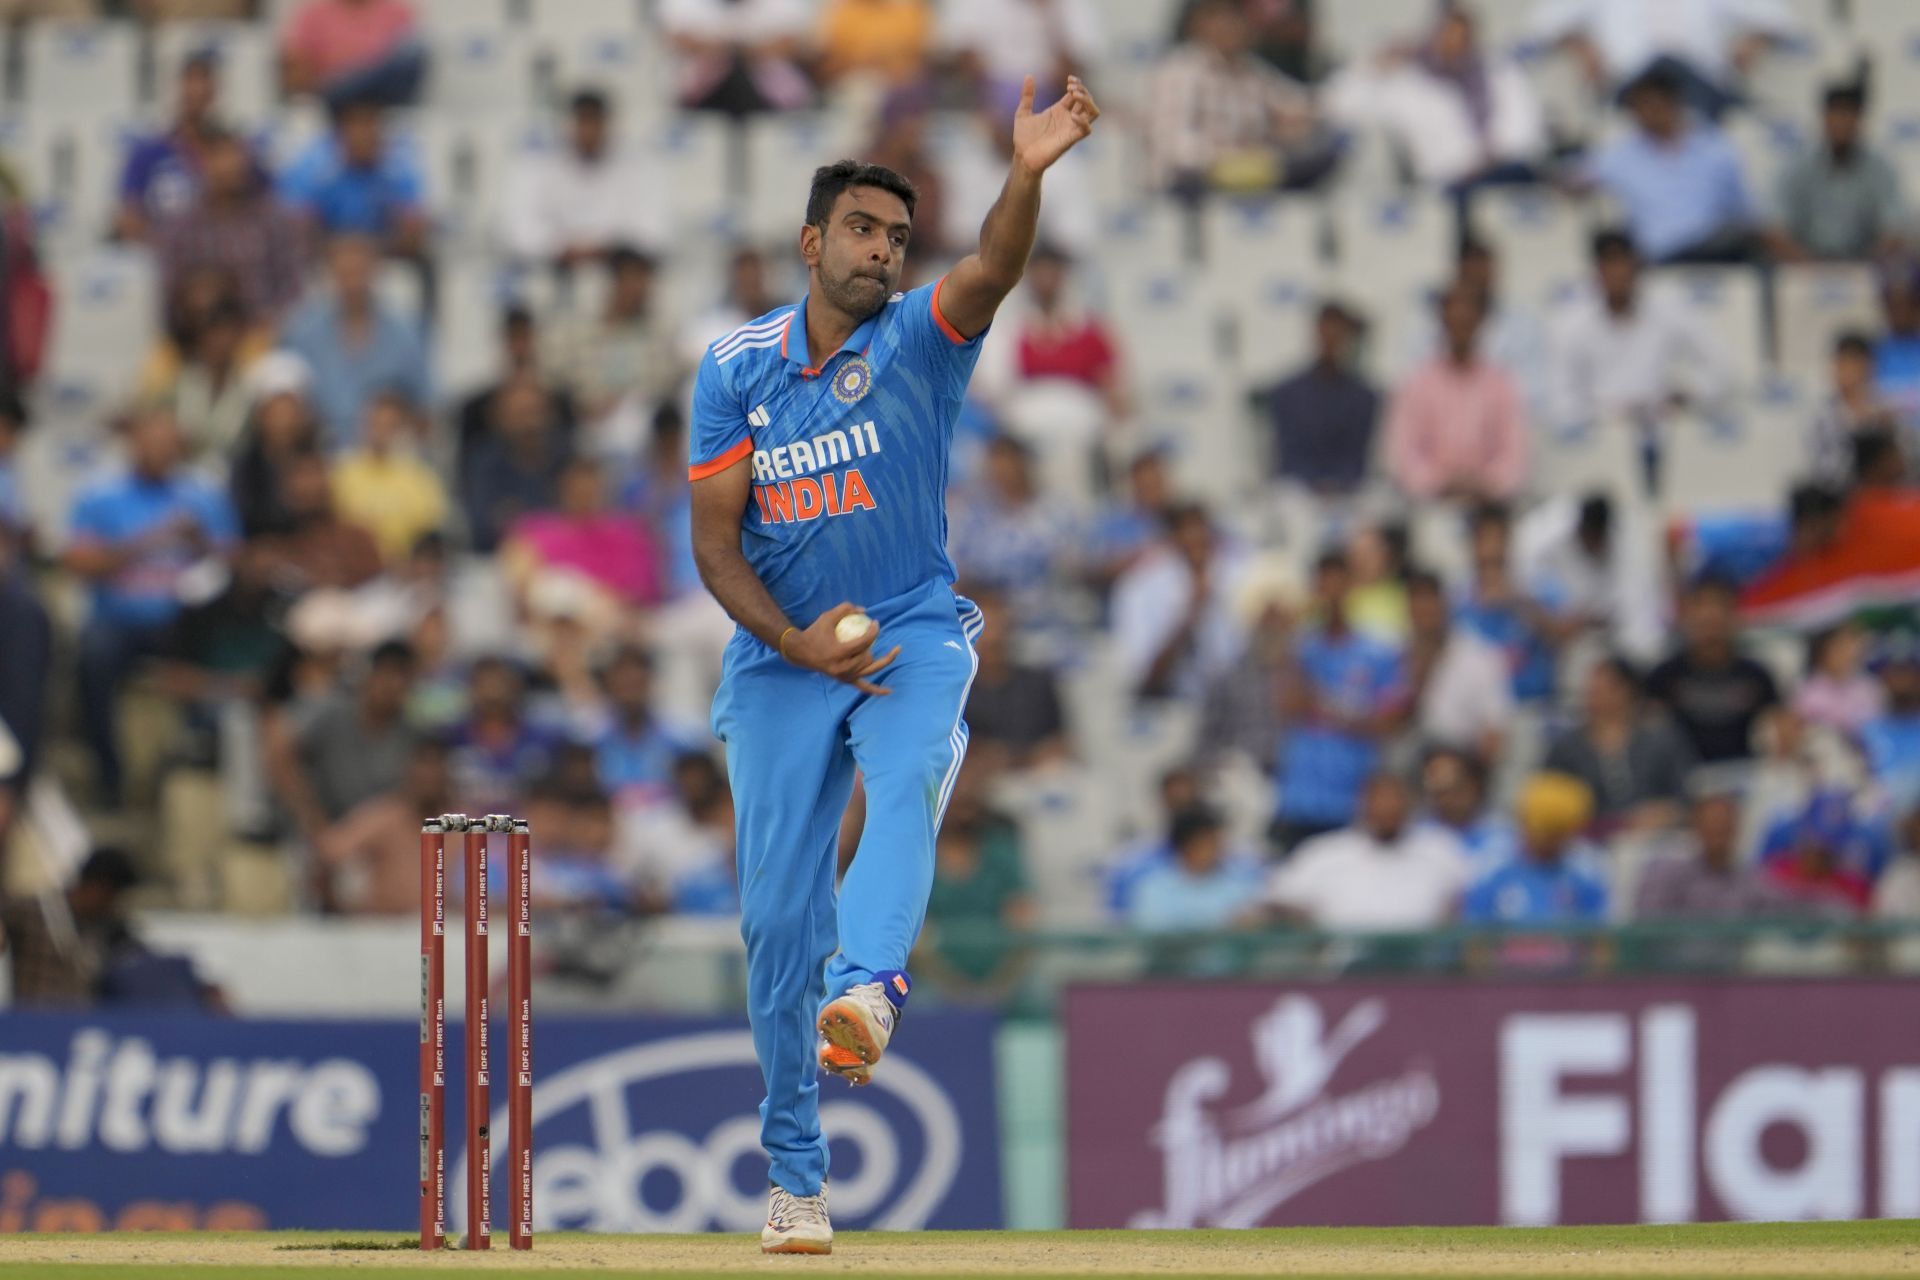 R. Ashwin is expected to lead the pack.